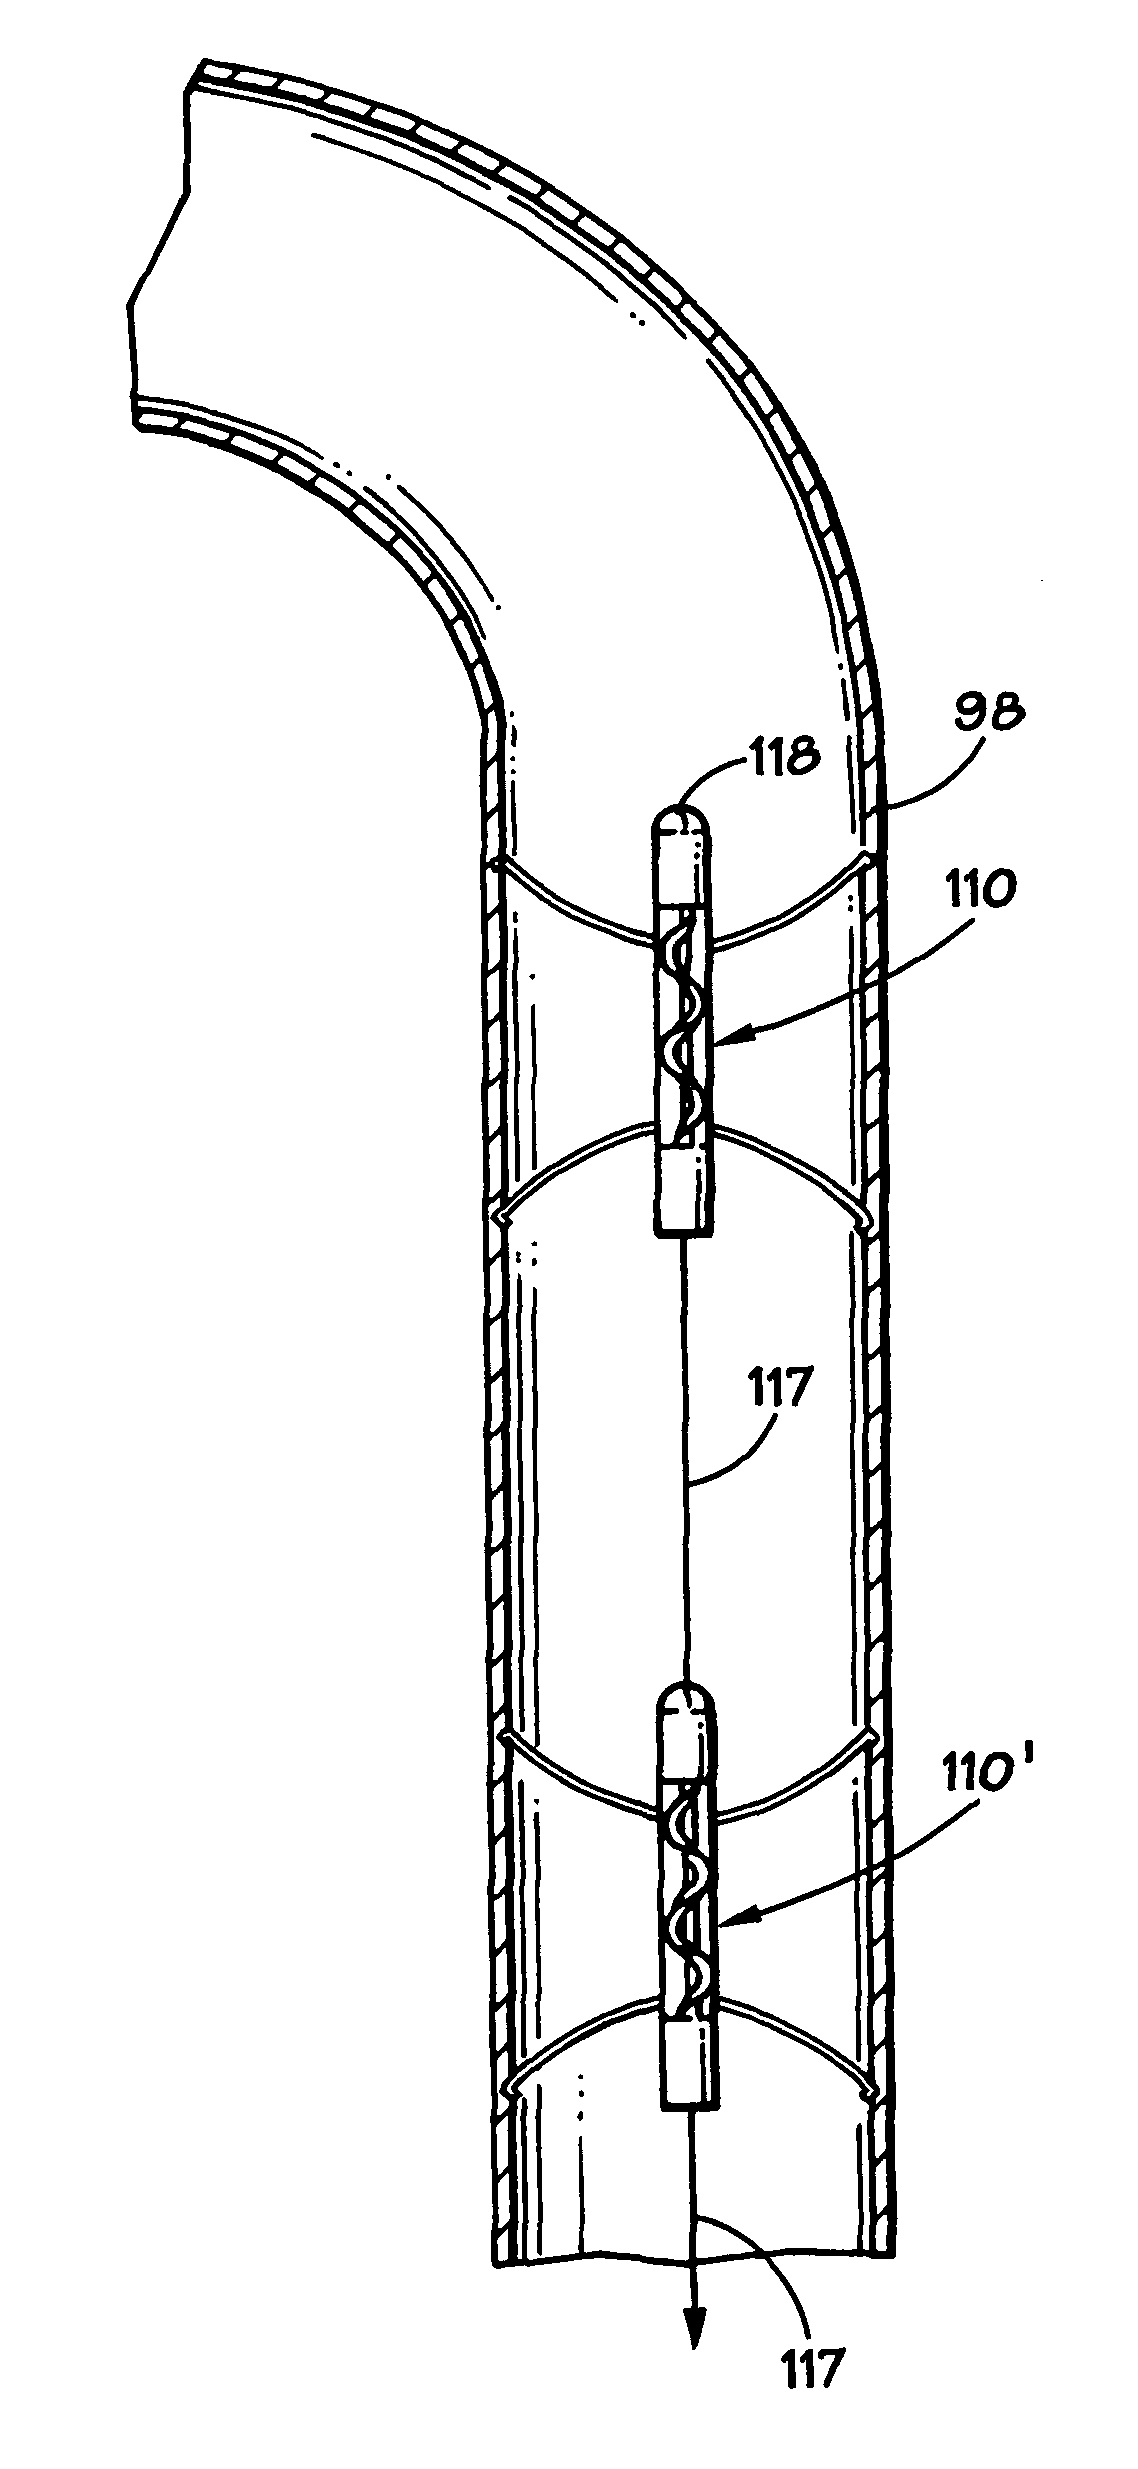 Method and apparatus for long-term assisting a left ventricle to pump blood